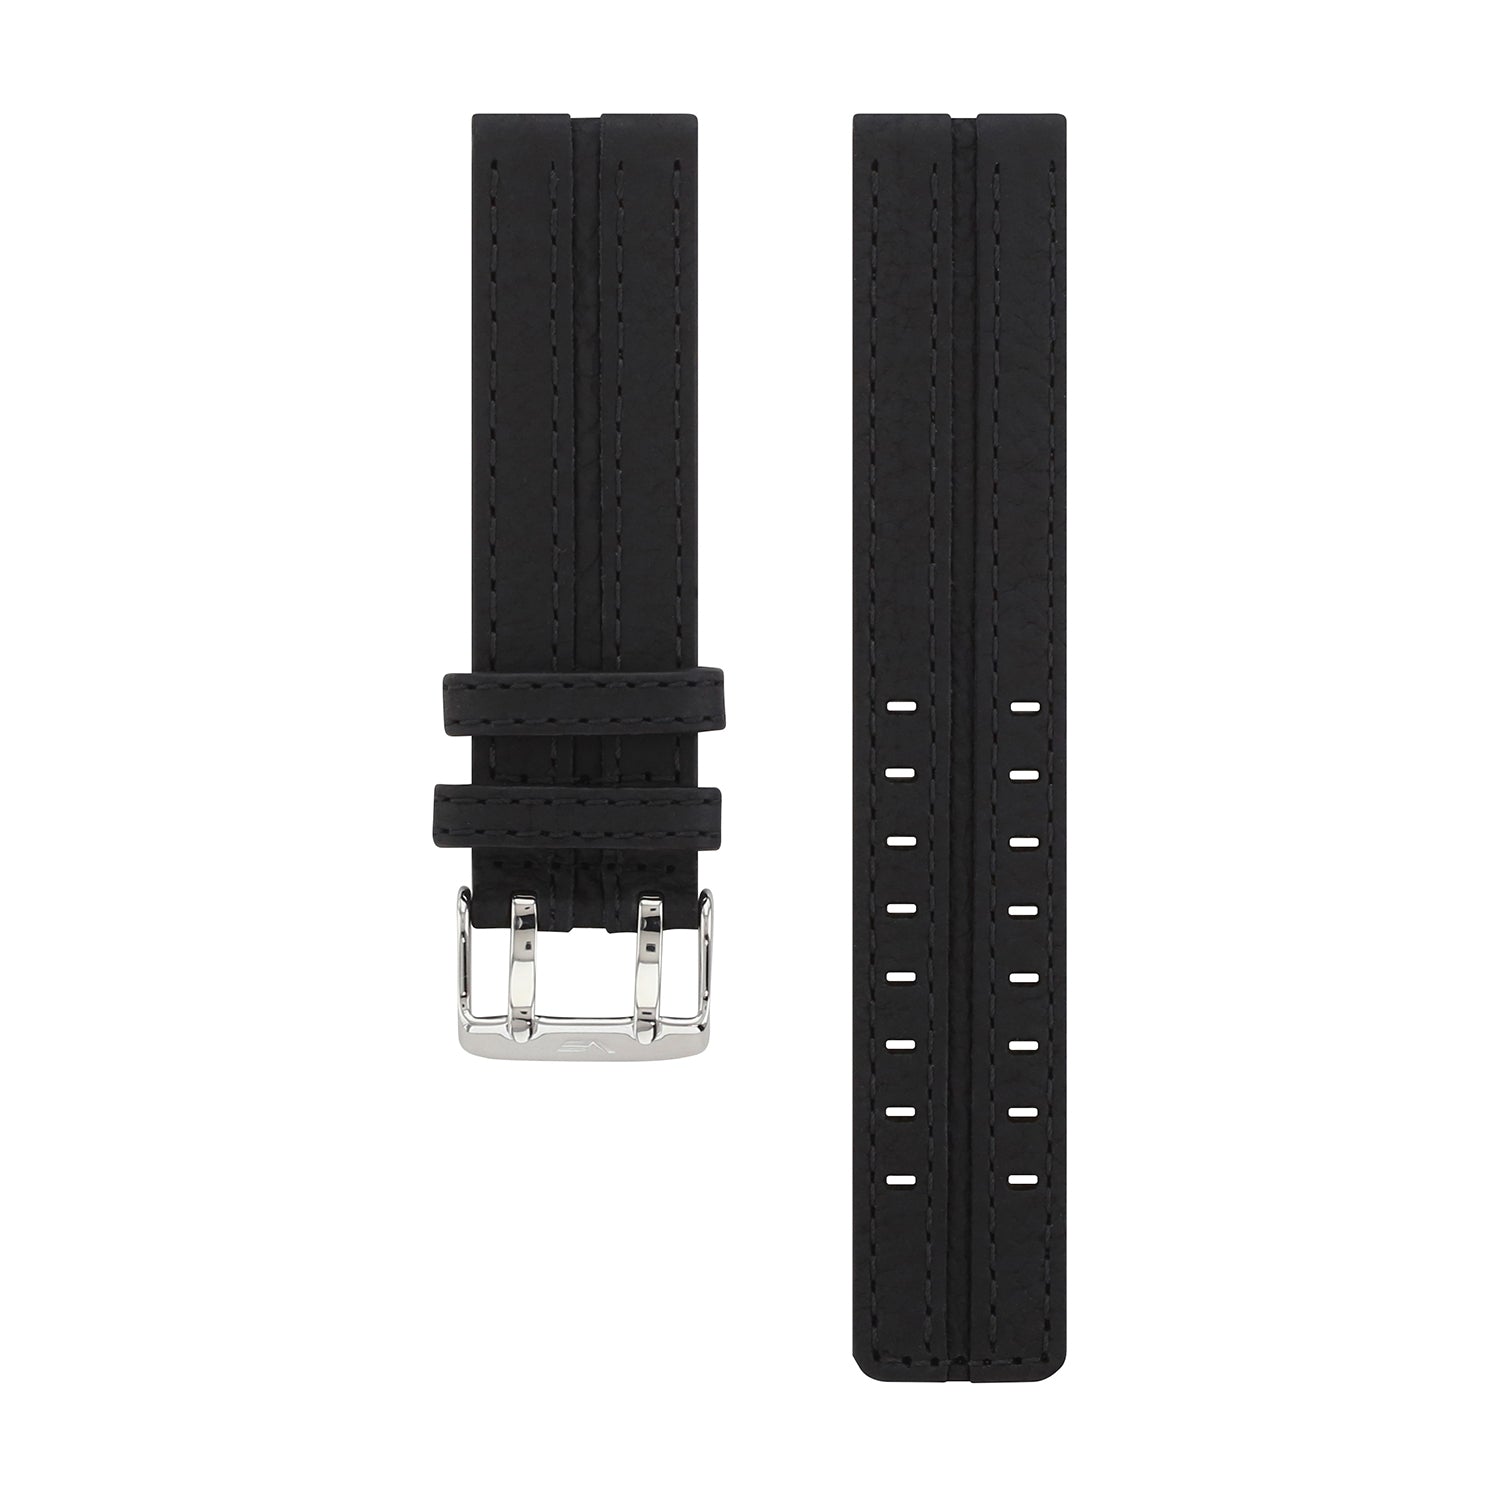 EXPEDITION BLACK LEATHER STRAP 22mm - POLISHED BUCKLE